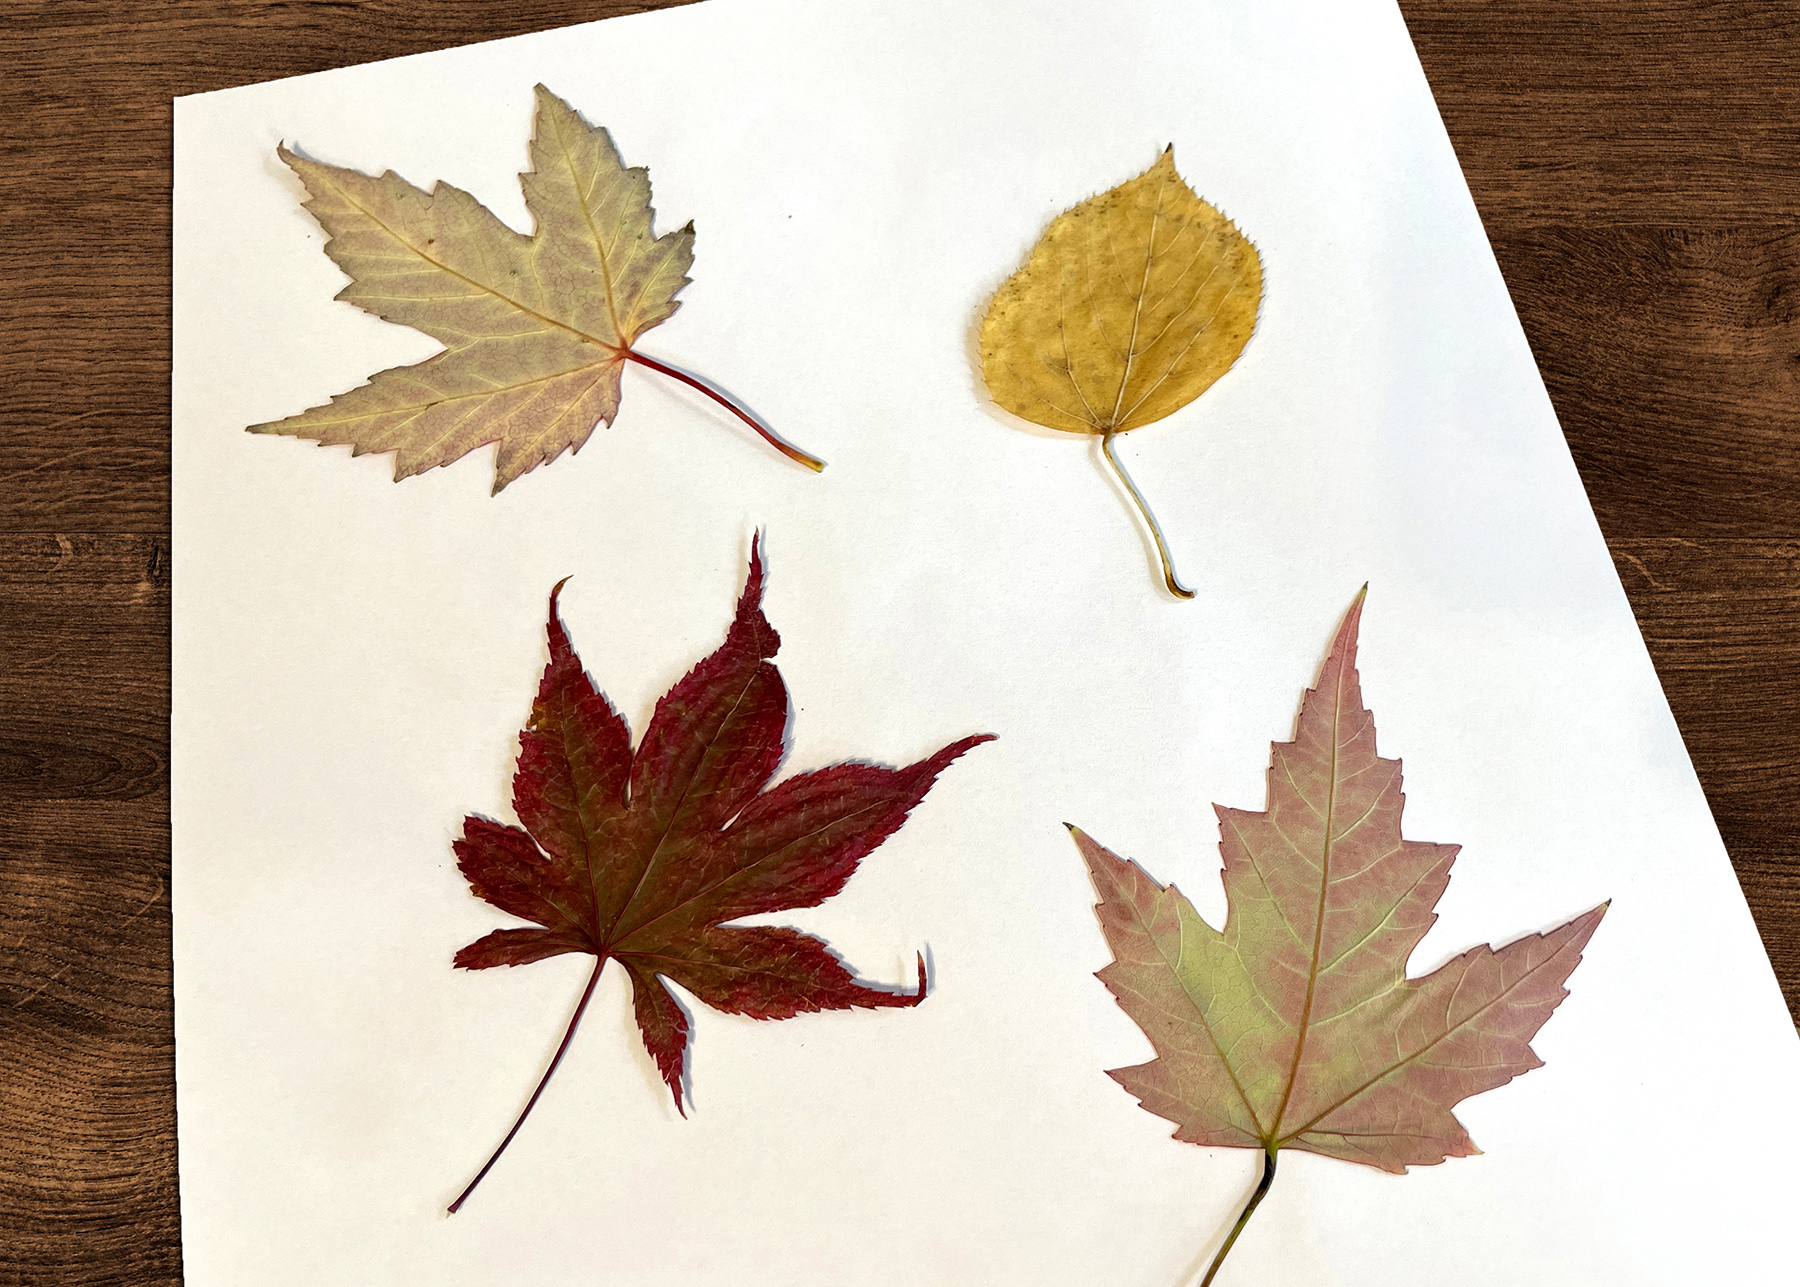 Autumn Art and Science Project